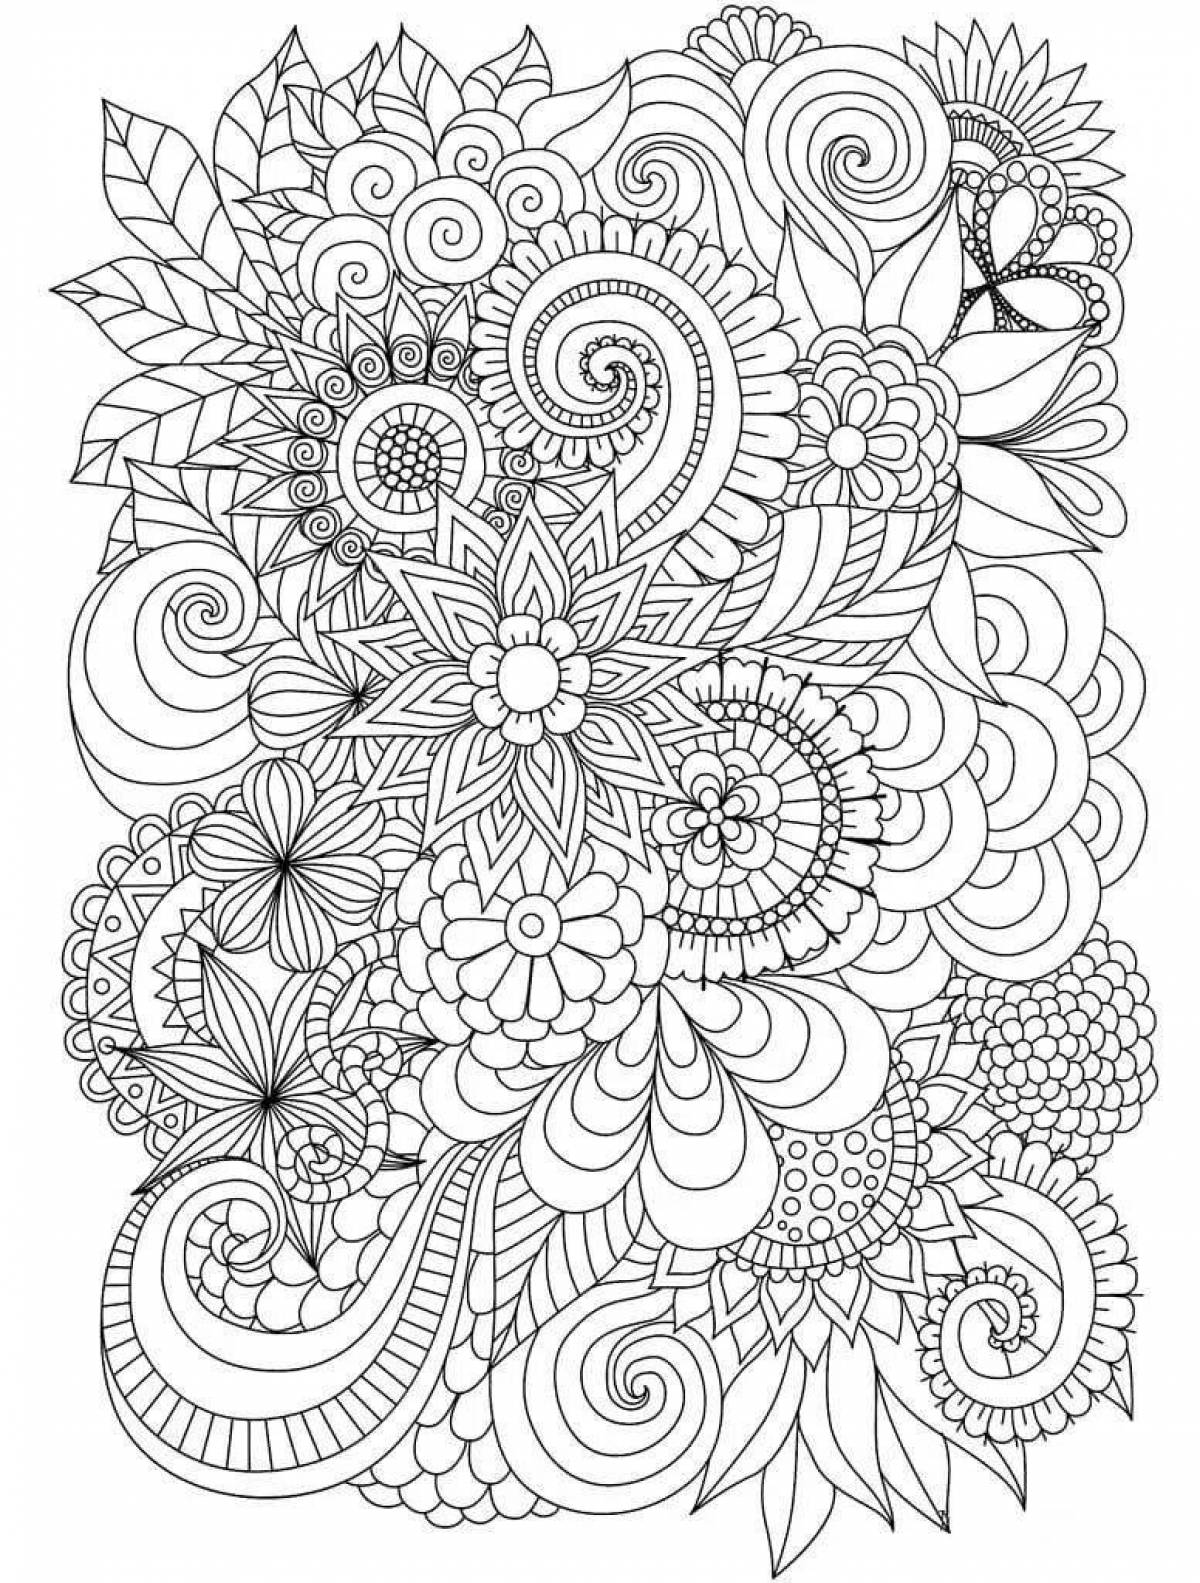 Anti-aging anti-stress coloring book for adults